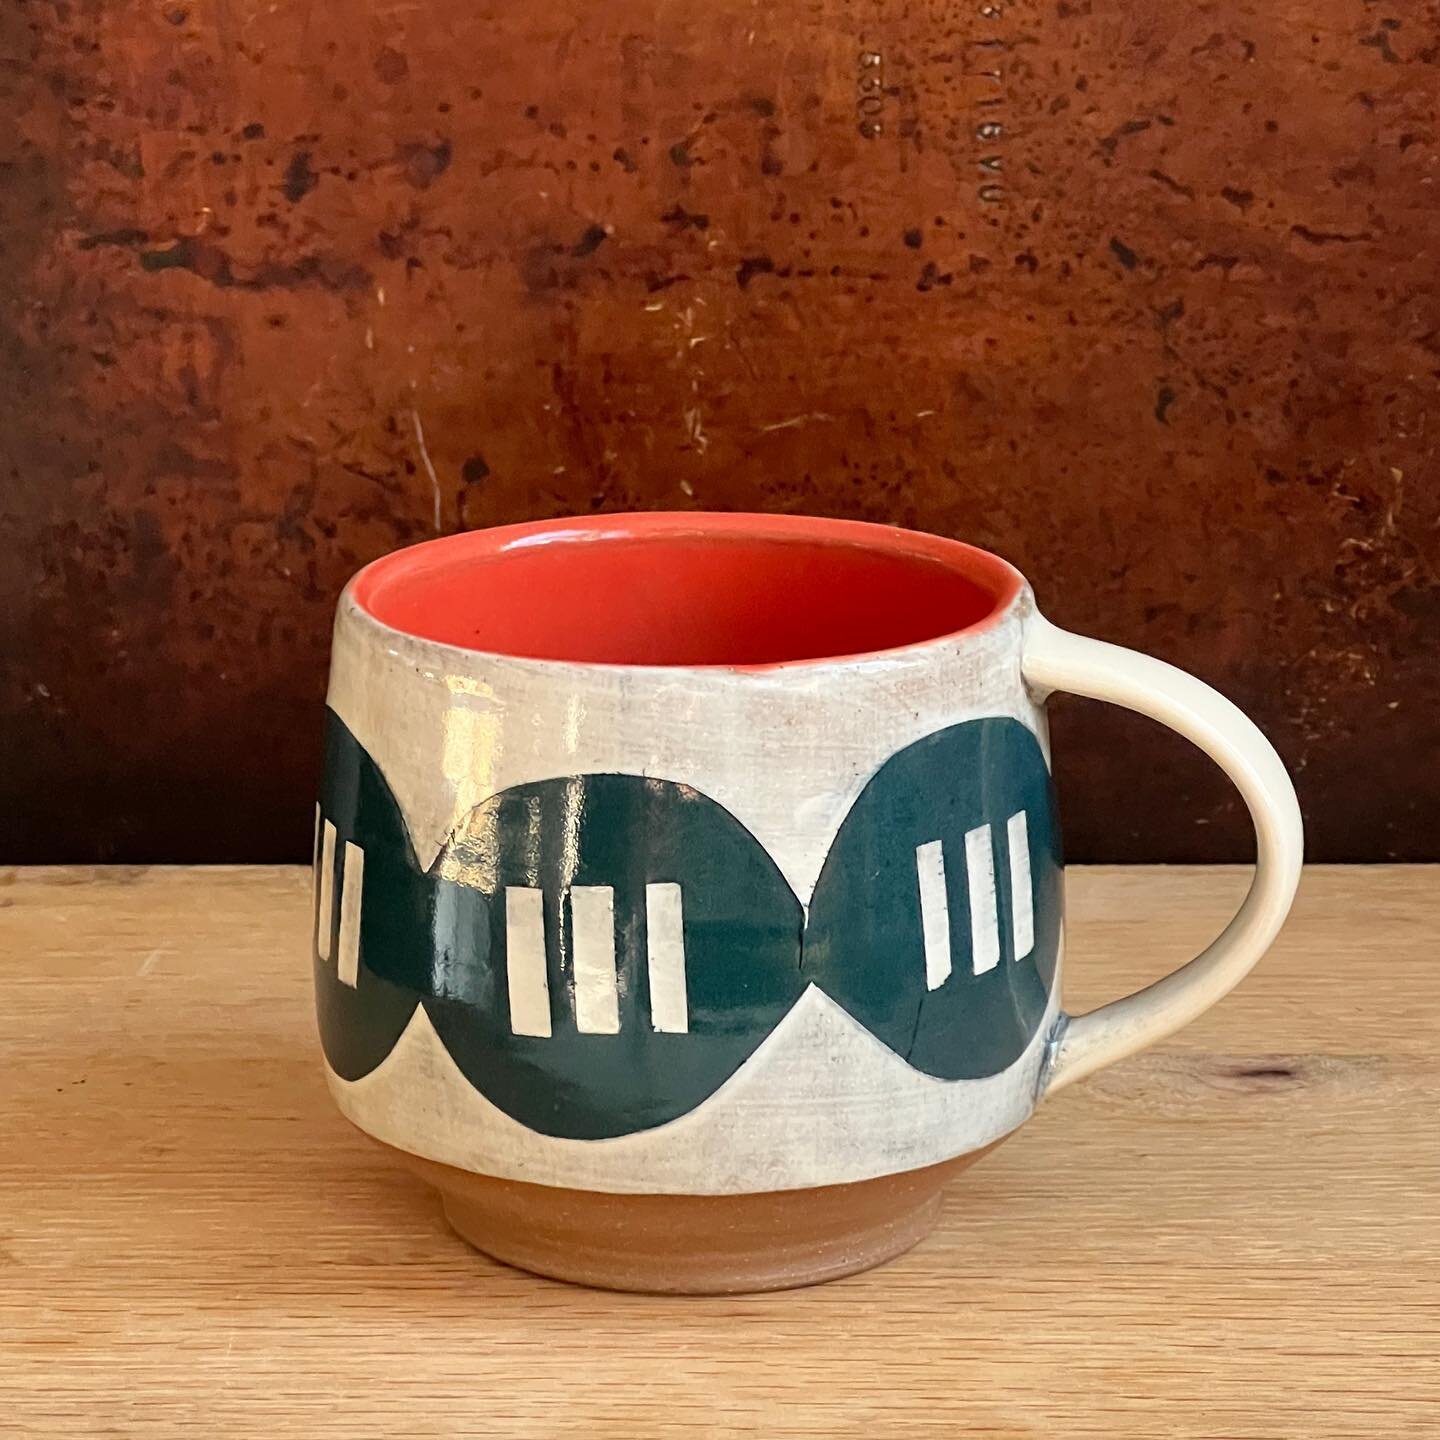 This mug wants to live in your house and be your friend. Make its dreams come true, tomorrow at 12. 

#ceramics #mug #giftideas #graphicclay